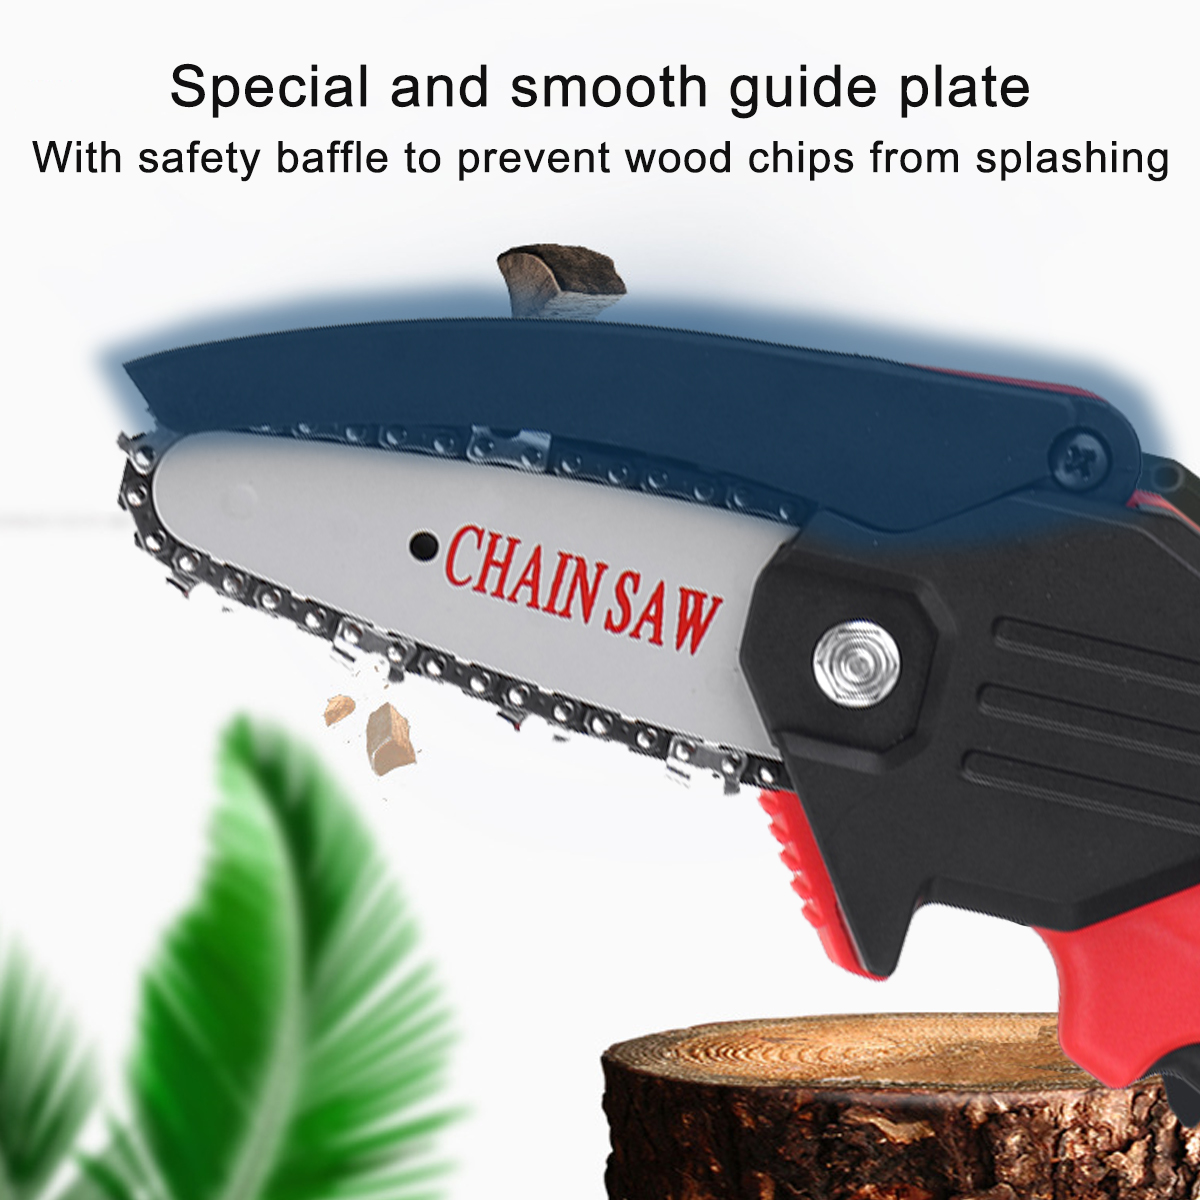 24V-650W-Portable-Wood-Pruning-Saw-4-Inch-Rechargable-Mini-Electric-Chainsaw-Handheld-Wood-Pruning-S-1823668-6